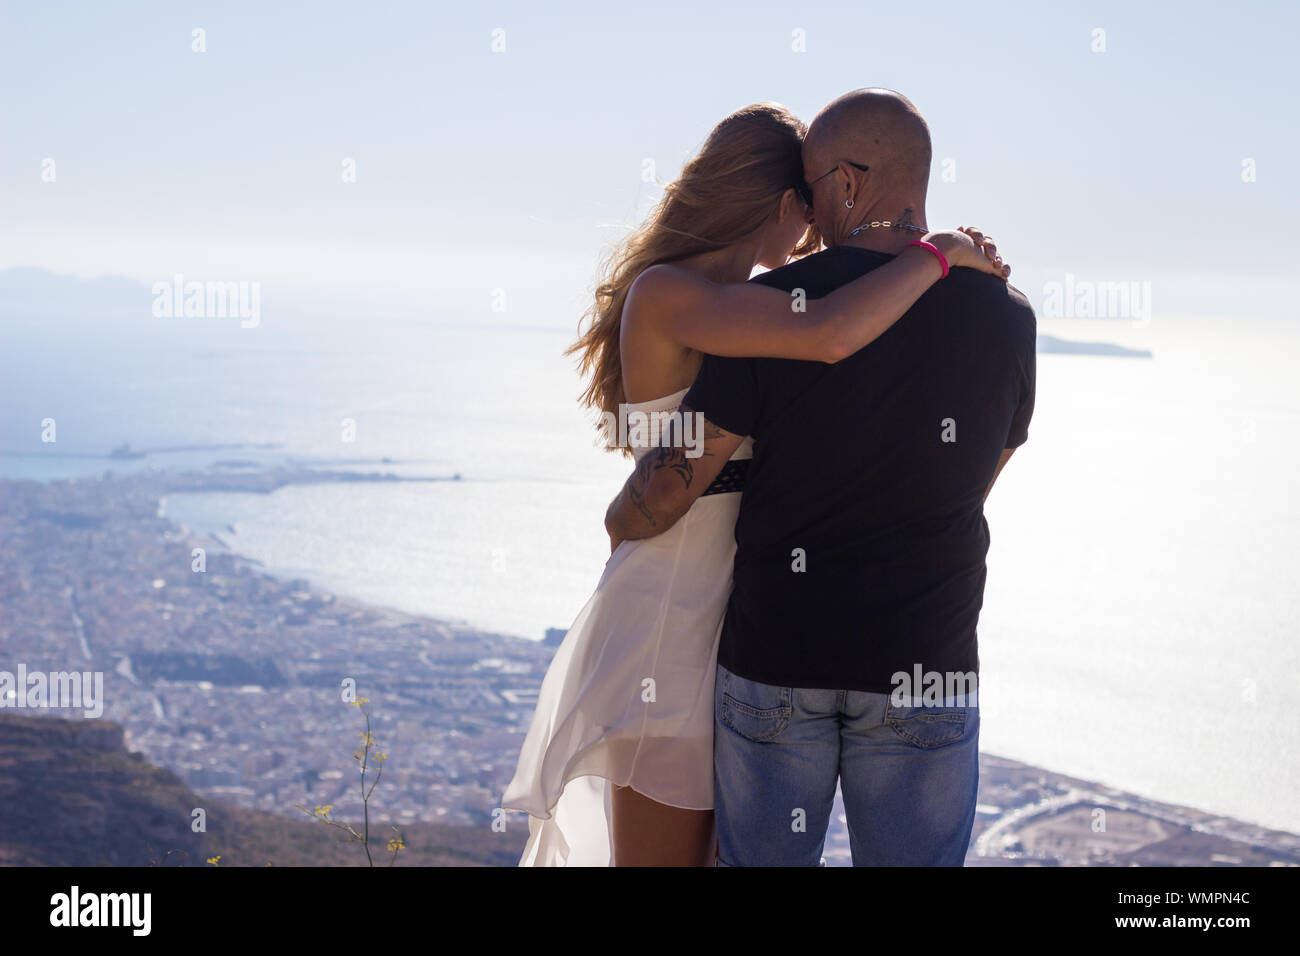 Couple on mountain top enjoying sea and landscape view Stock Photo